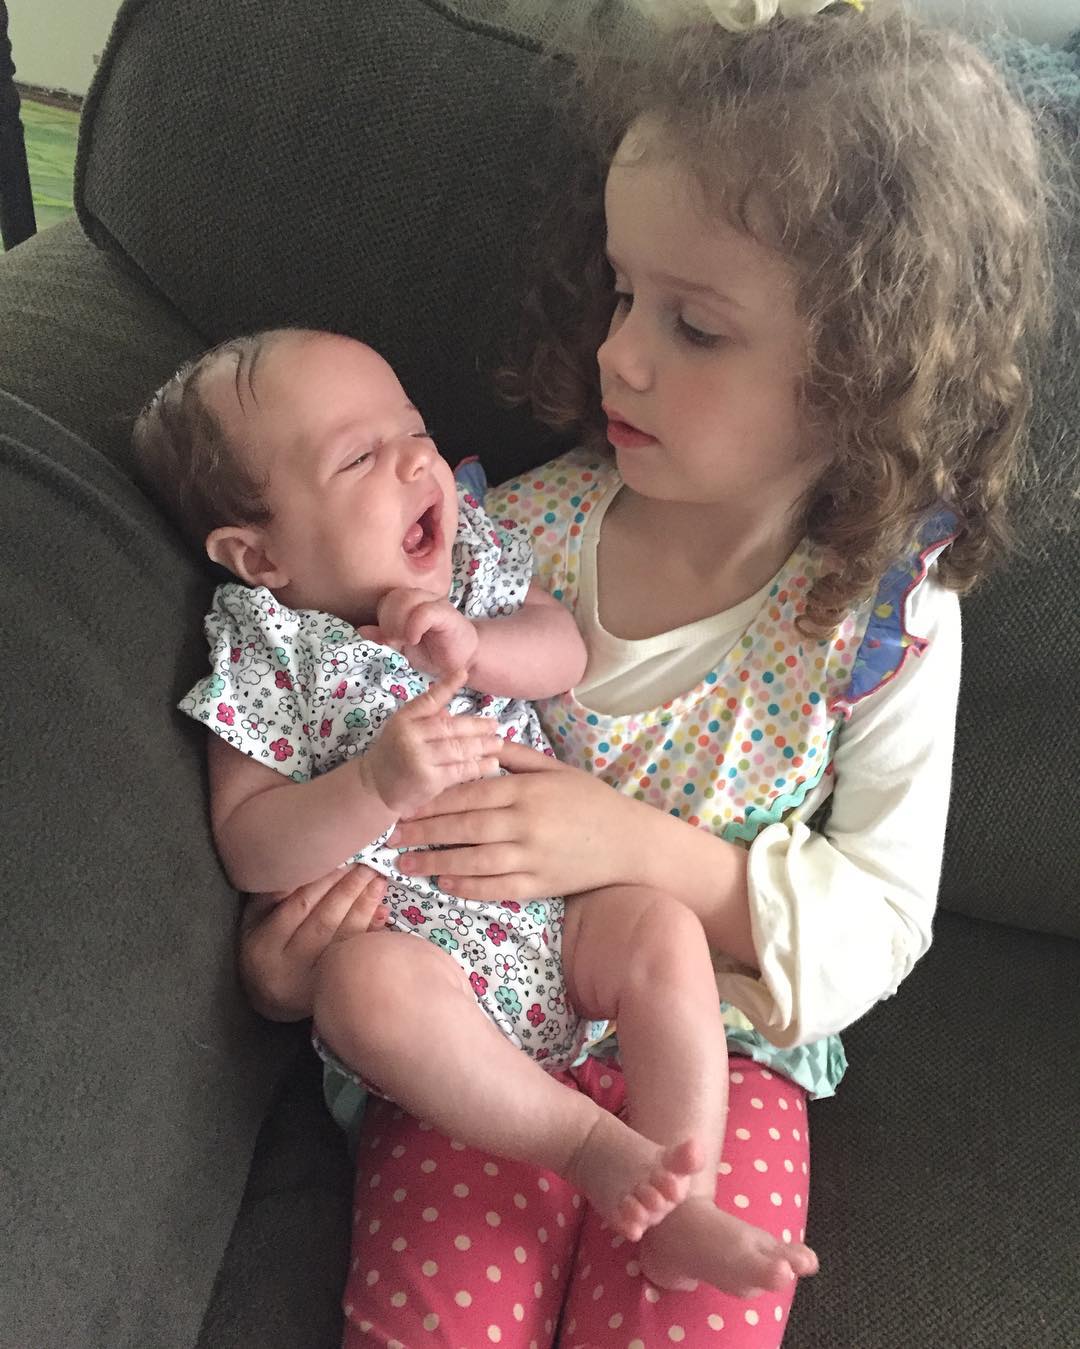 Look at #Rosebud holding Piper! #cousins